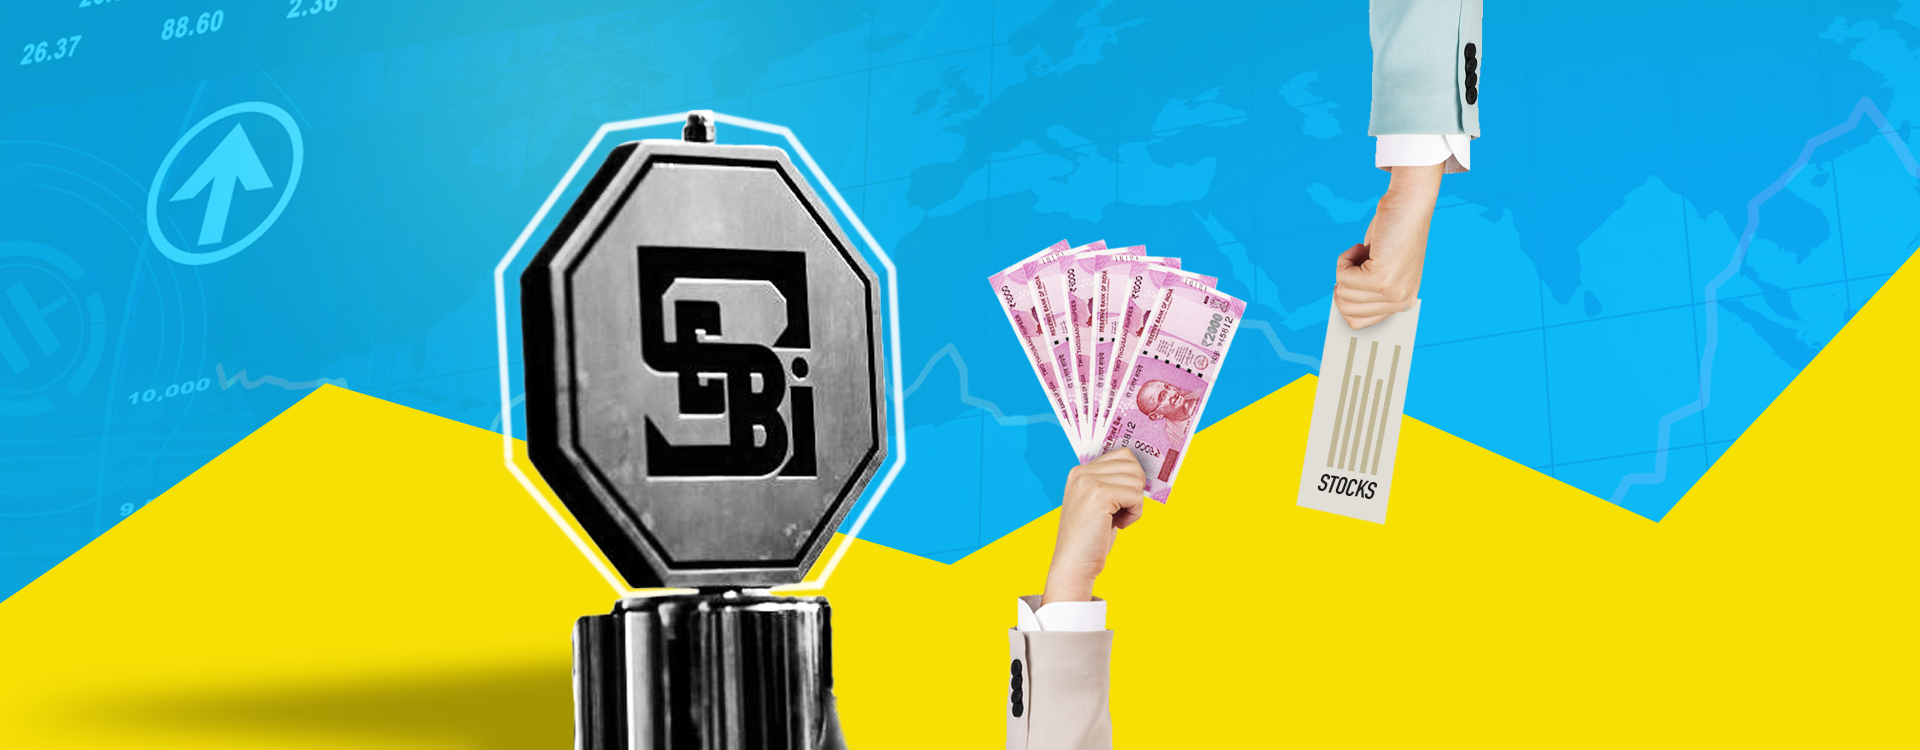 Margin Pledging Rules By SEBI: What It Means For Retail Investors?